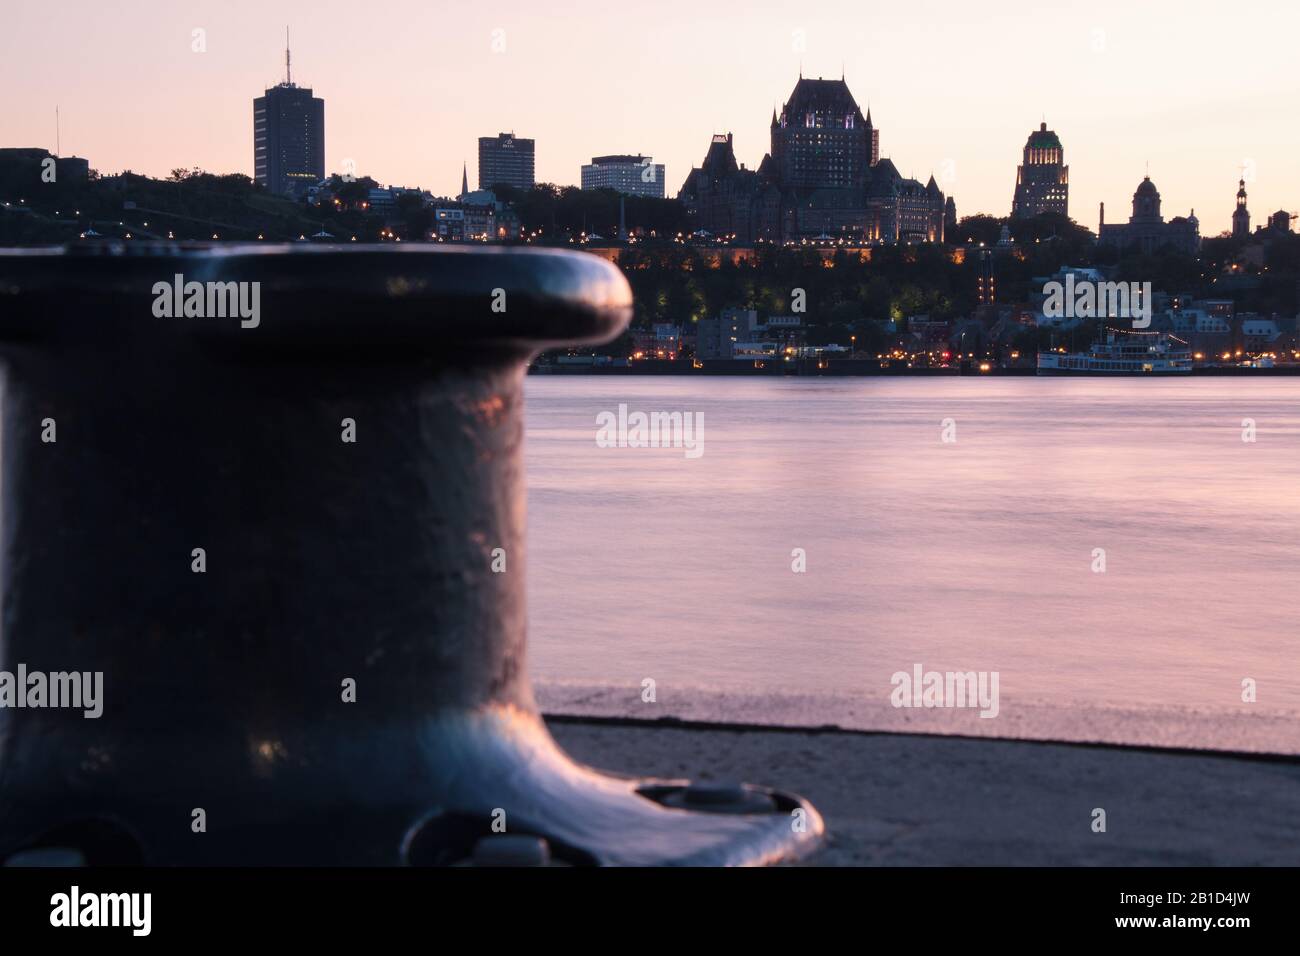 Famous Hotel Chateau Frontenac Castle of Quebec city seen from the other side of the saint lawrence river after sunset at blue hour with bitt (dock) Stock Photo